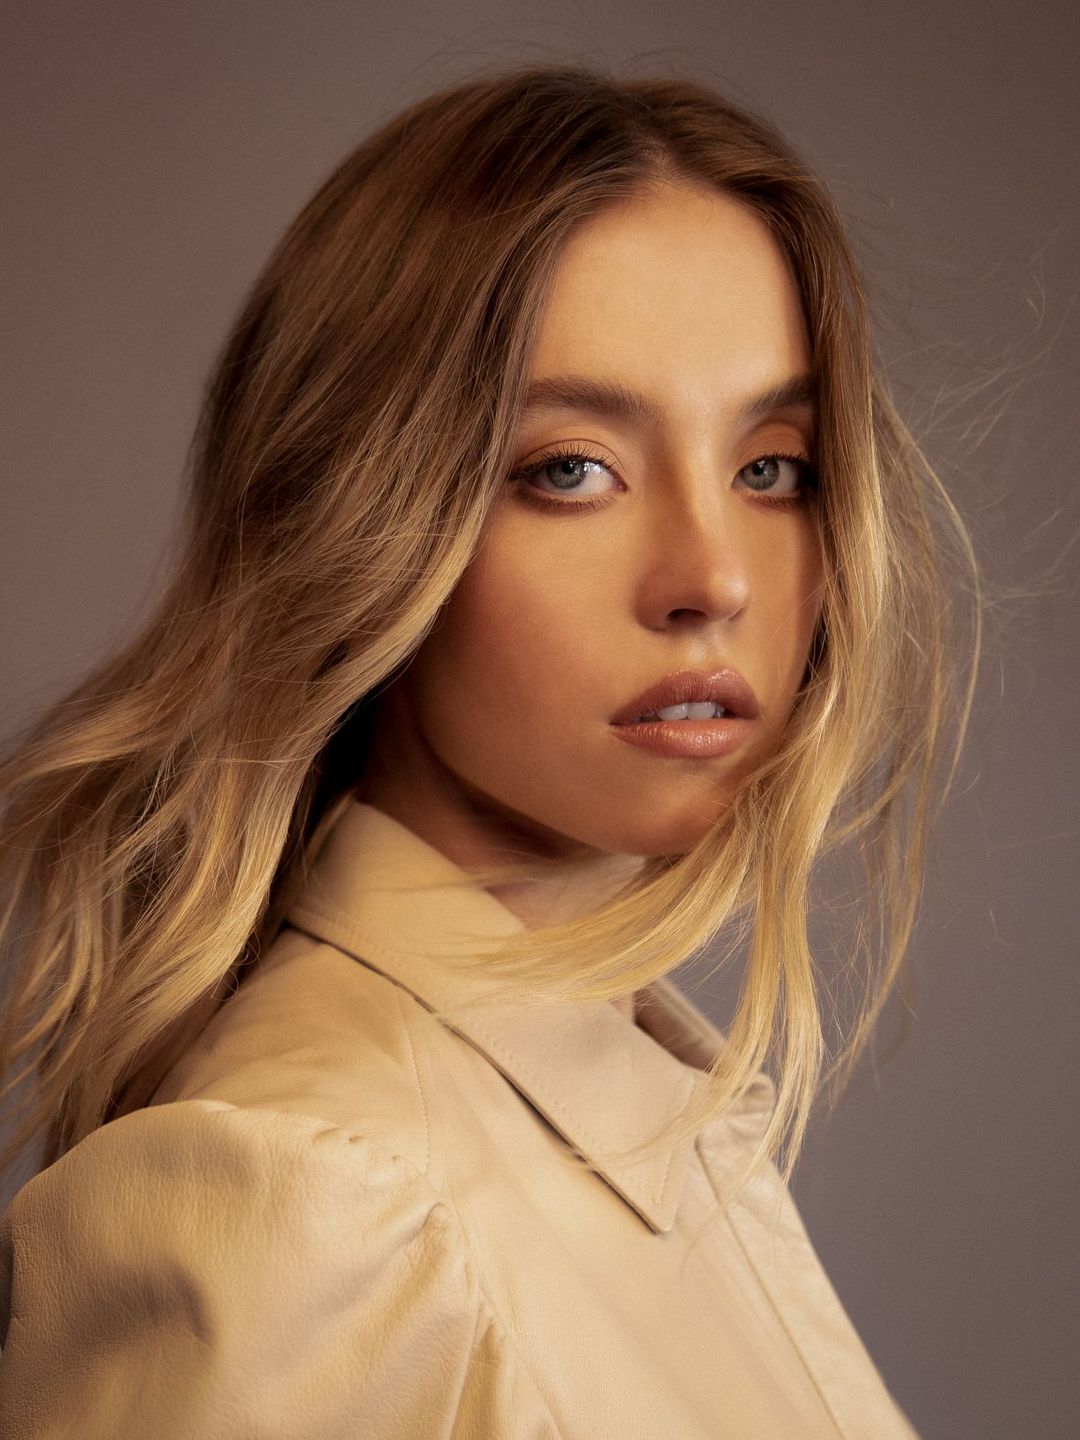 Sydney Sweeney height and weight